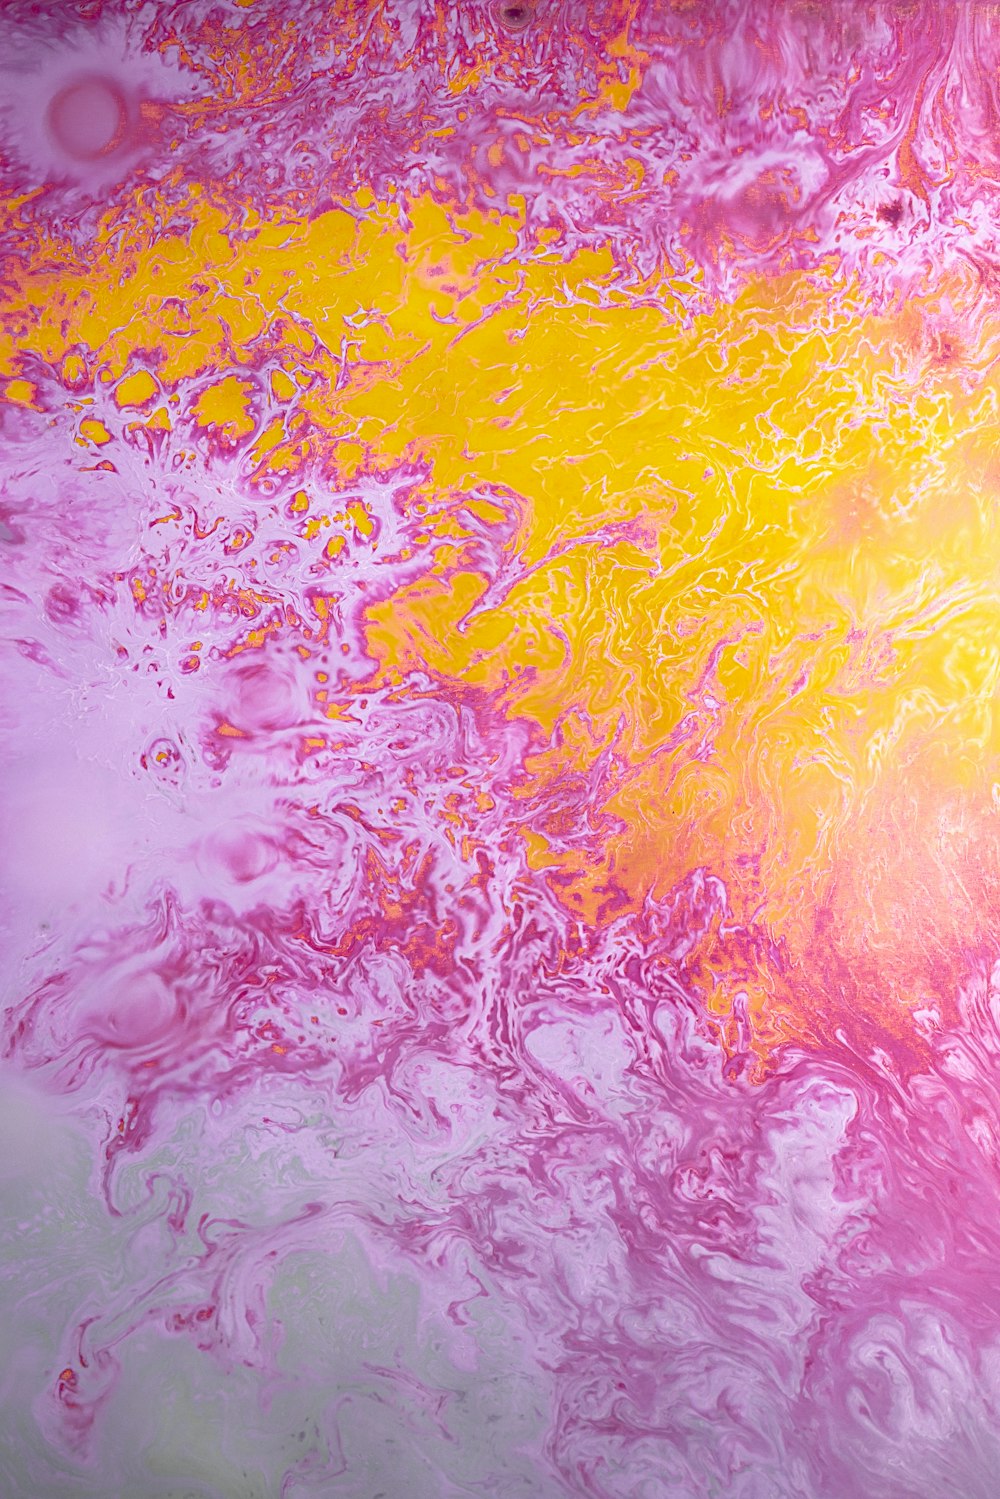 yellow pink and blue abstract painting